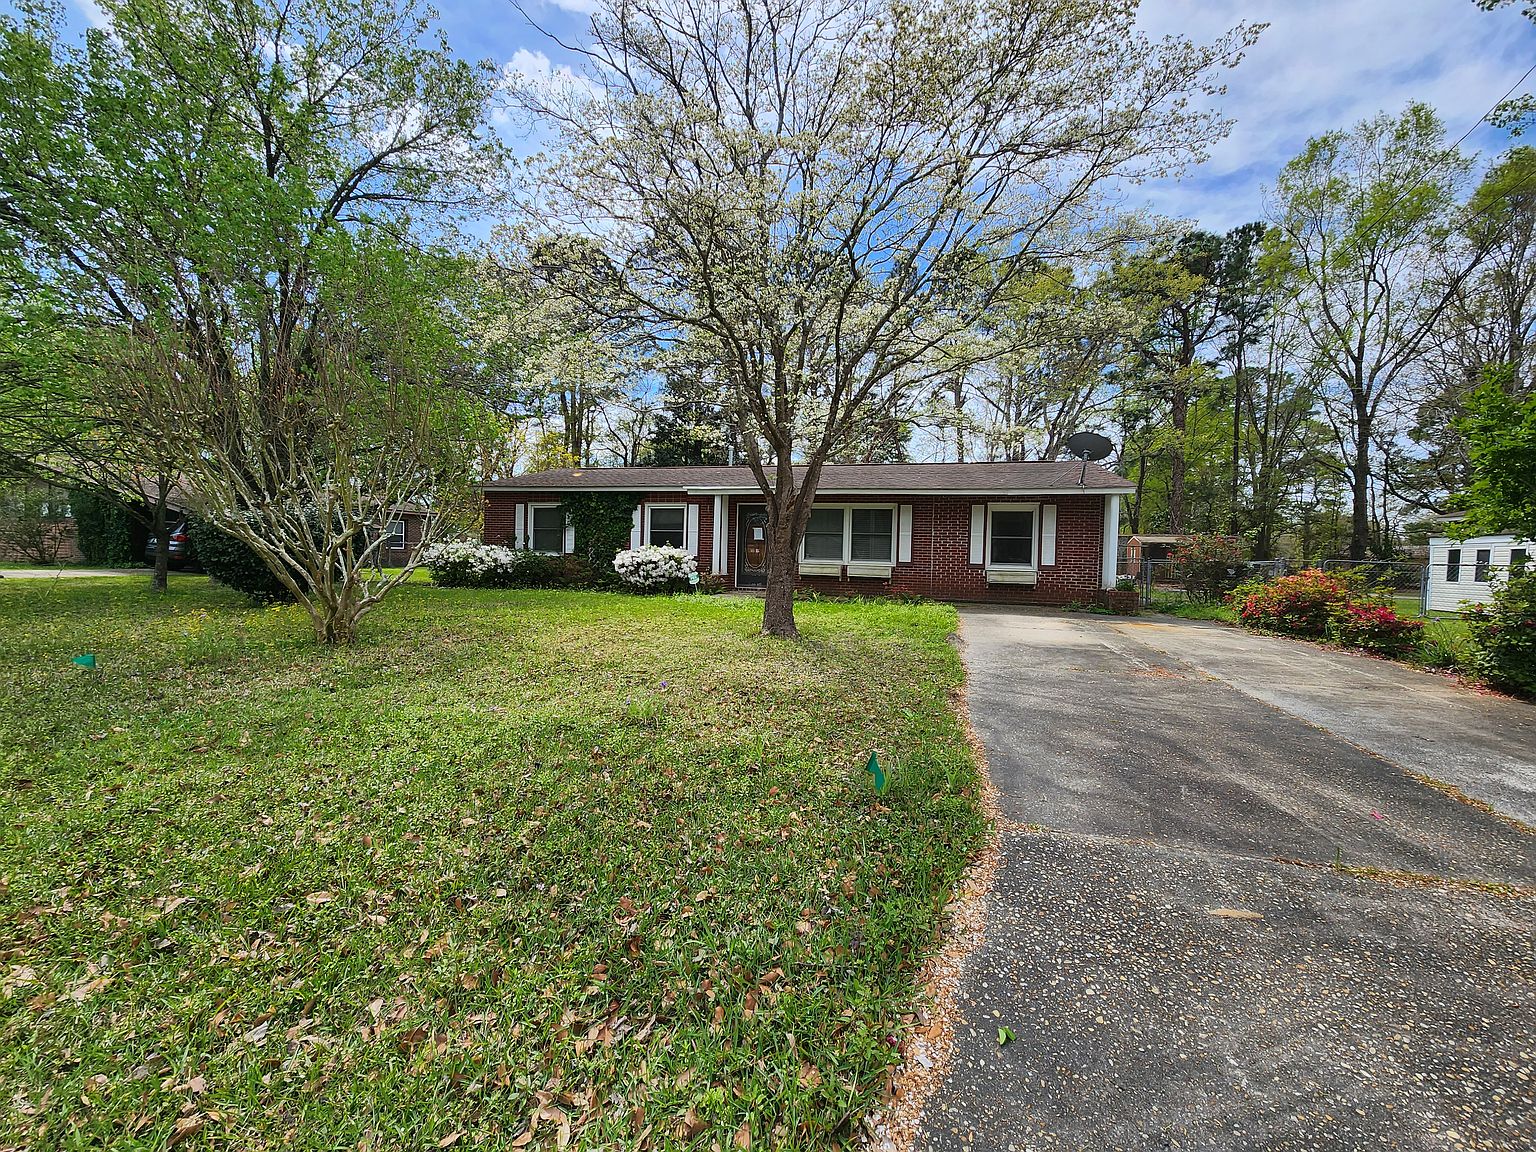 33 Roselle Ave, Goose Creek, SC 29445 | Zillow